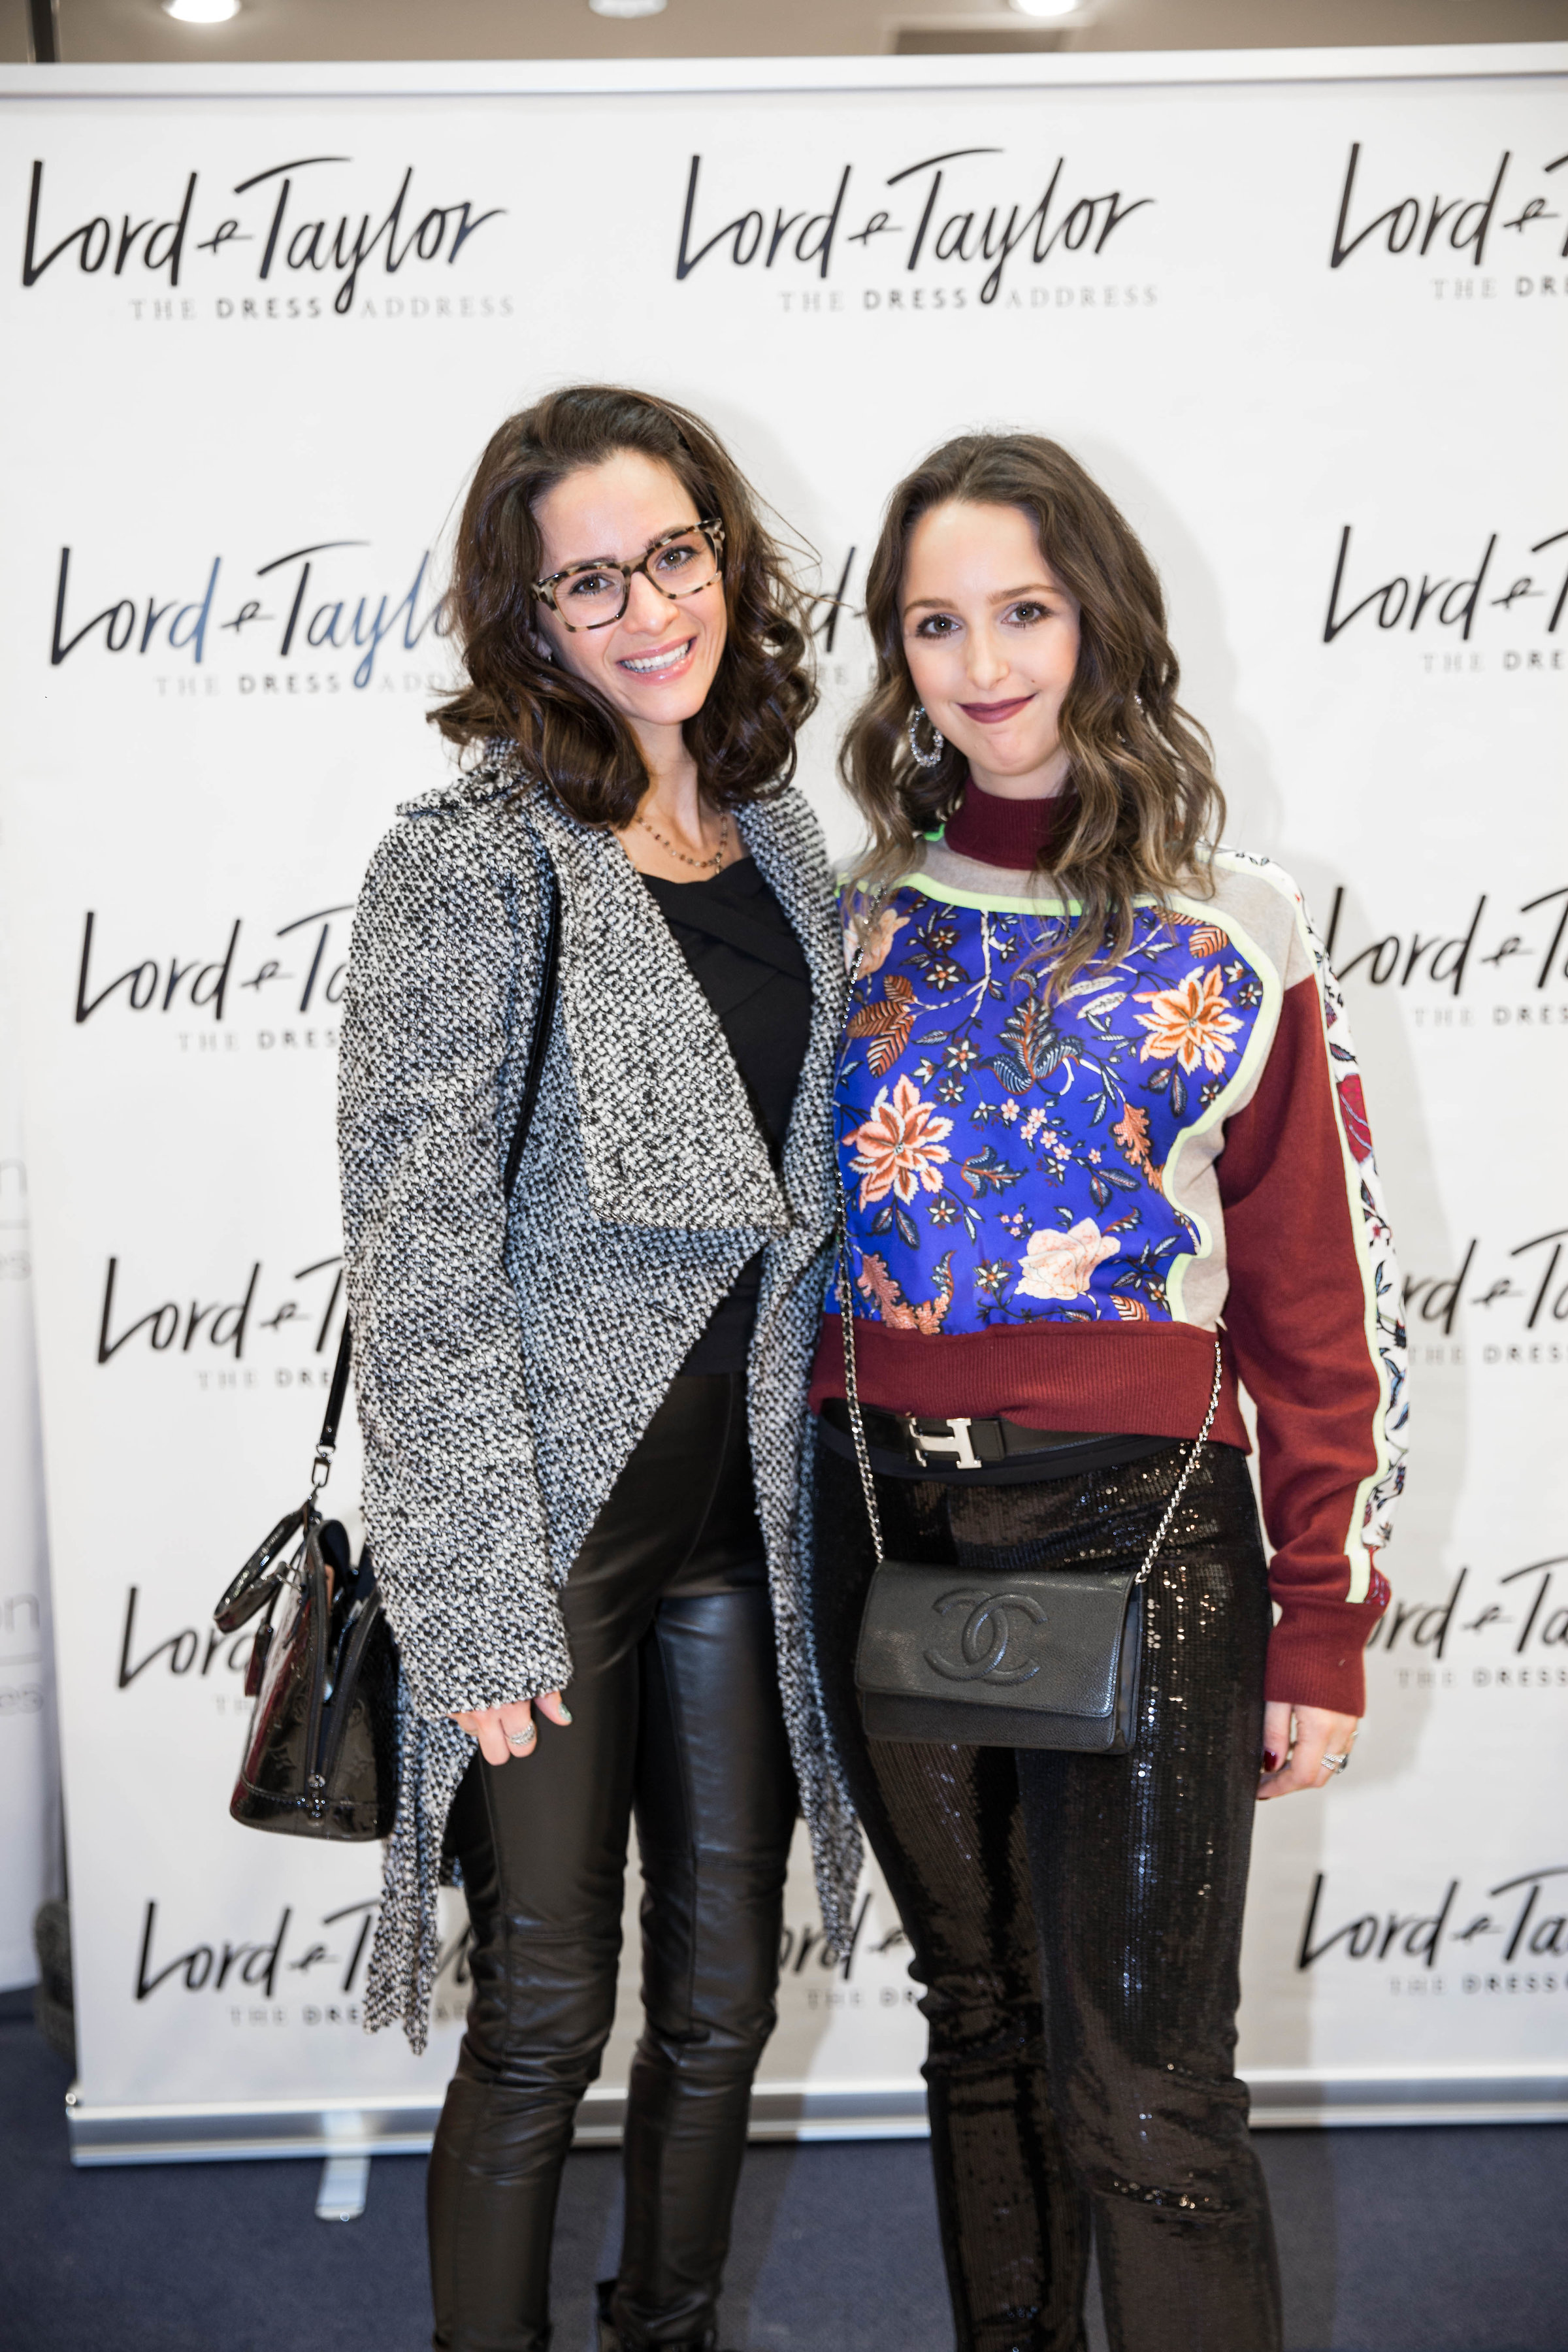 lord & taylor-simply by simone-event-westchester-ny-blogger-style-dvf-hermes-chanel-meet and greet-bauble bar